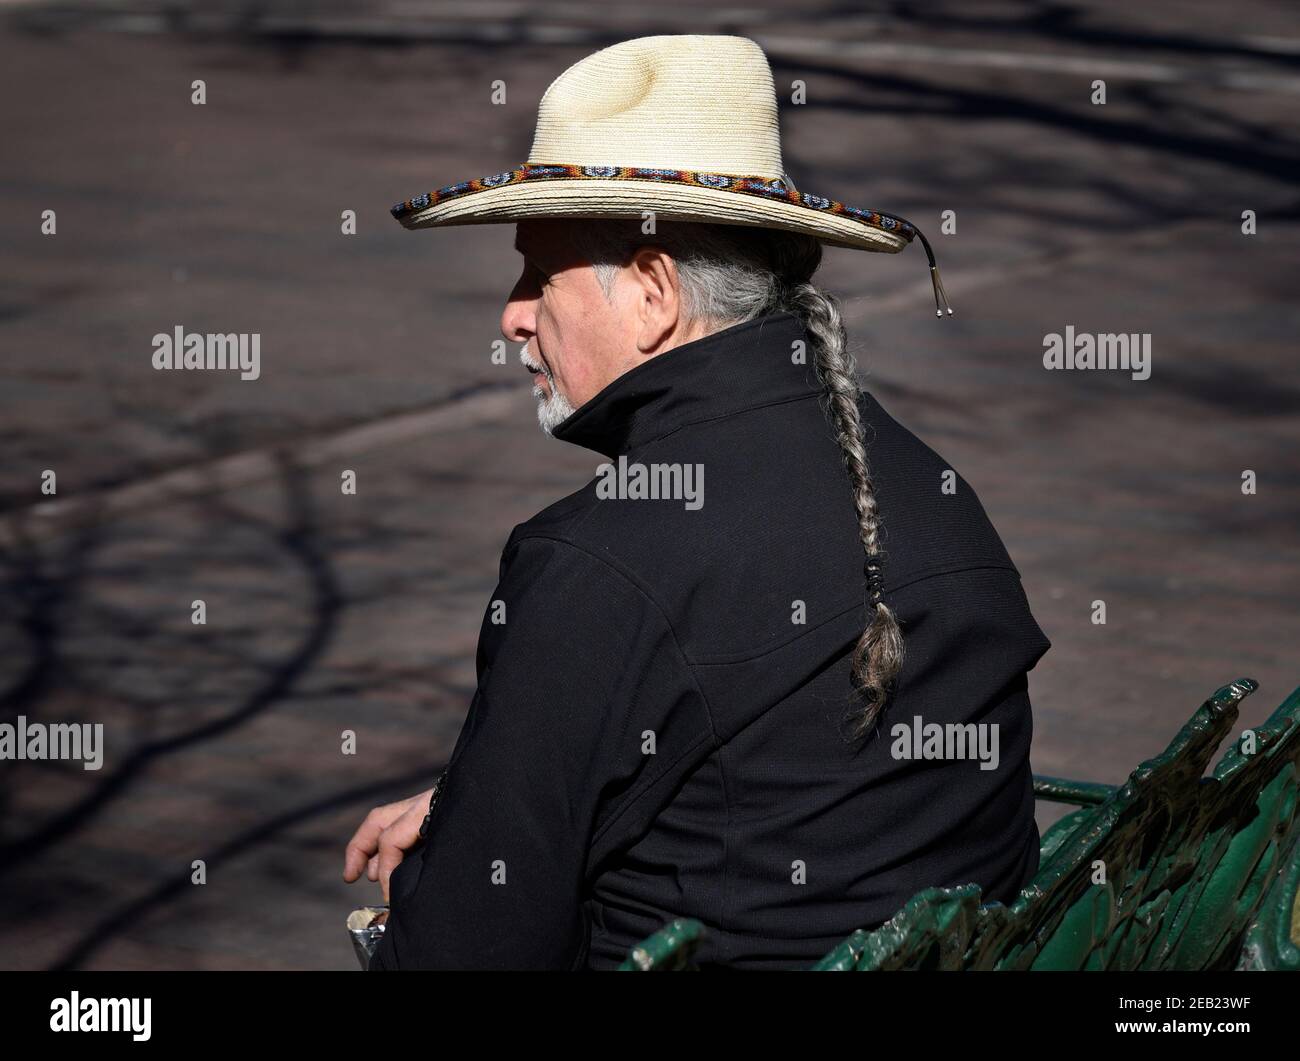 An Hispanic man with braided hair (Ramon Jose Lopez, a well-known artist) sits on a bench in the historic Plaza in Santa Fe, New Mexico. Stock Photo